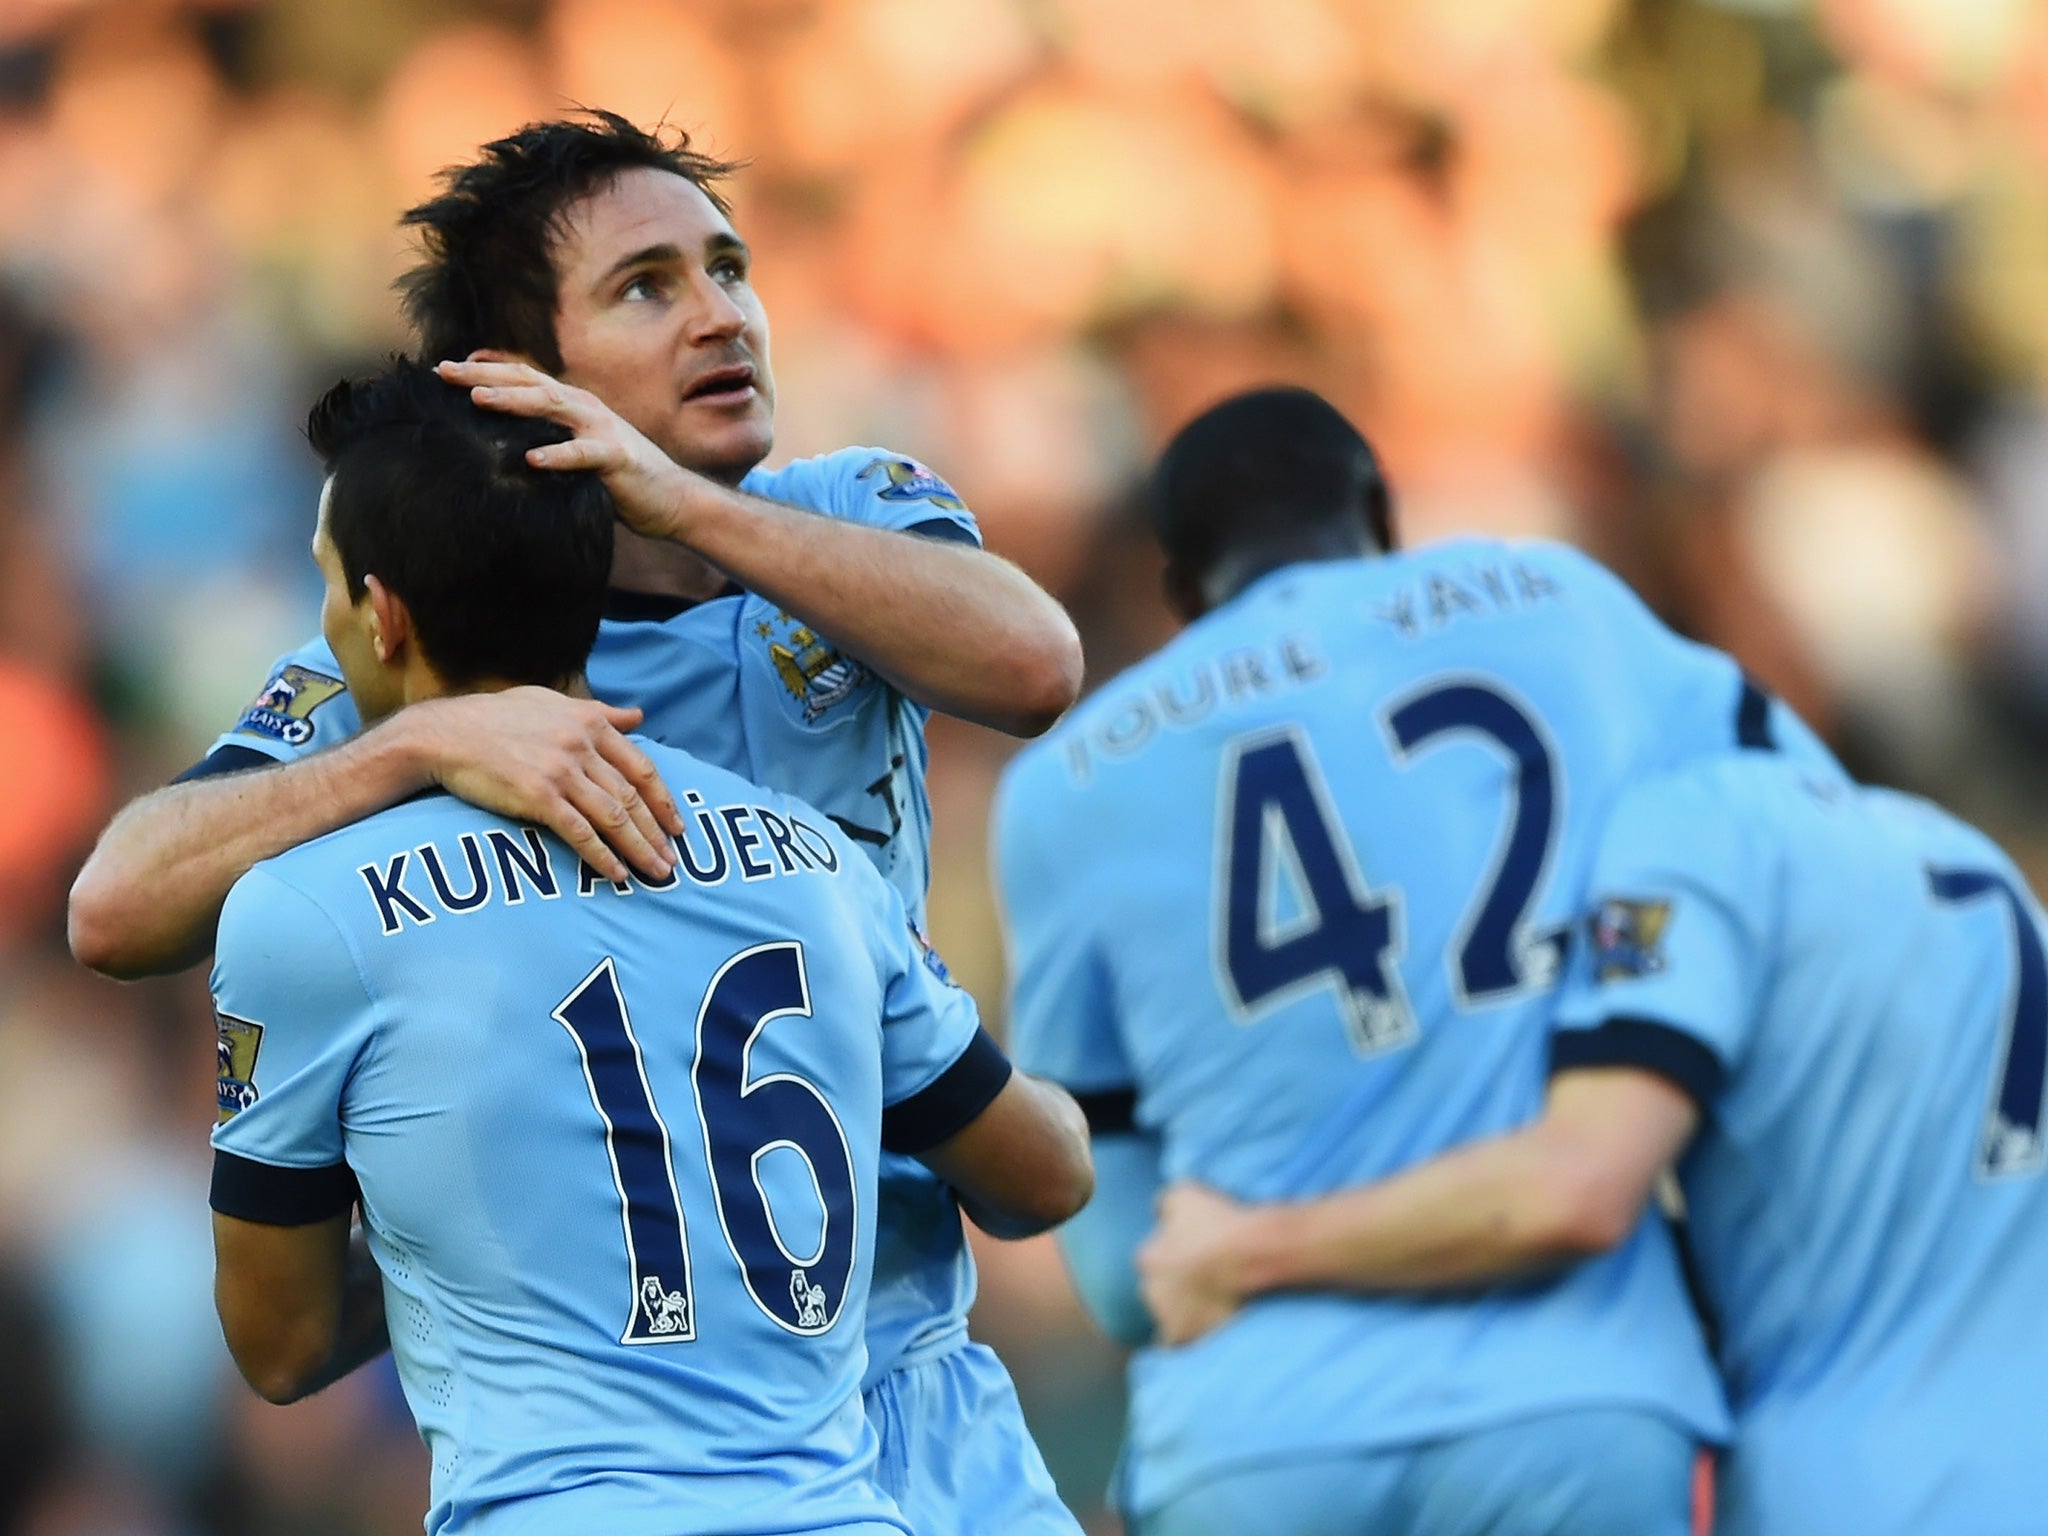 City's first-team players earn an average £96,445 per week